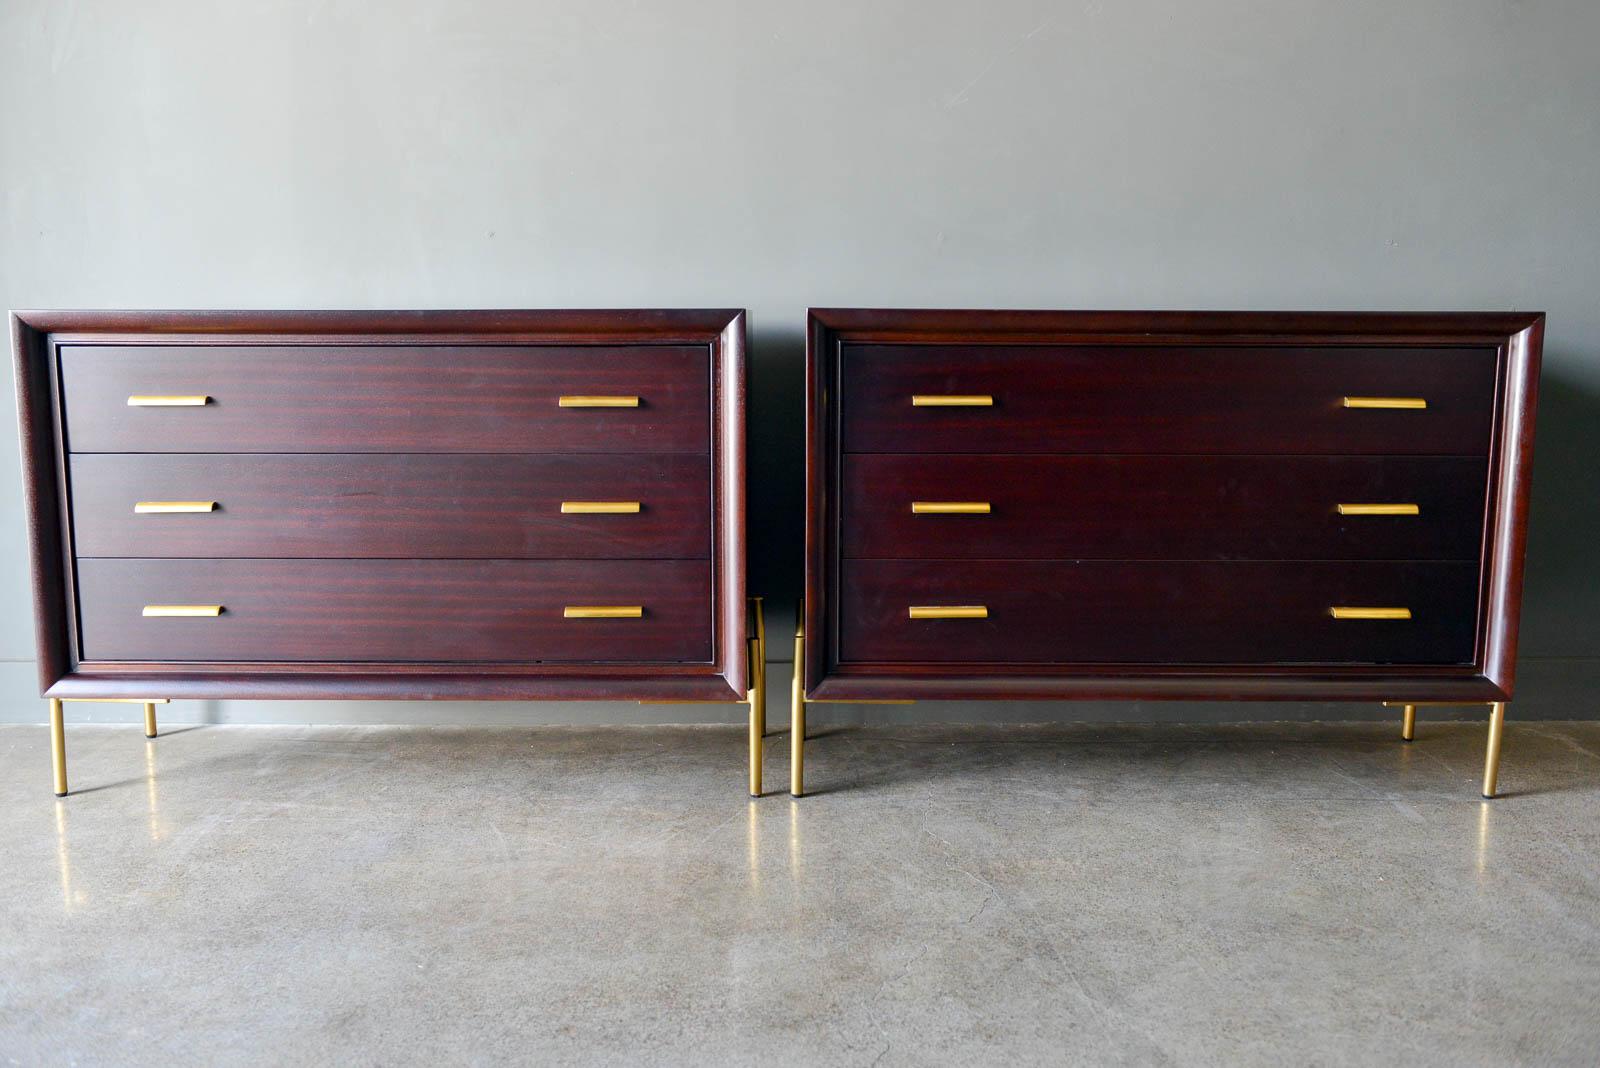 Pair of ebonized mahogany brass cabinets. Beautiful solid construction, they have been professionally restored in very good condition. Could also be used as larger nightstands.

Measure 42